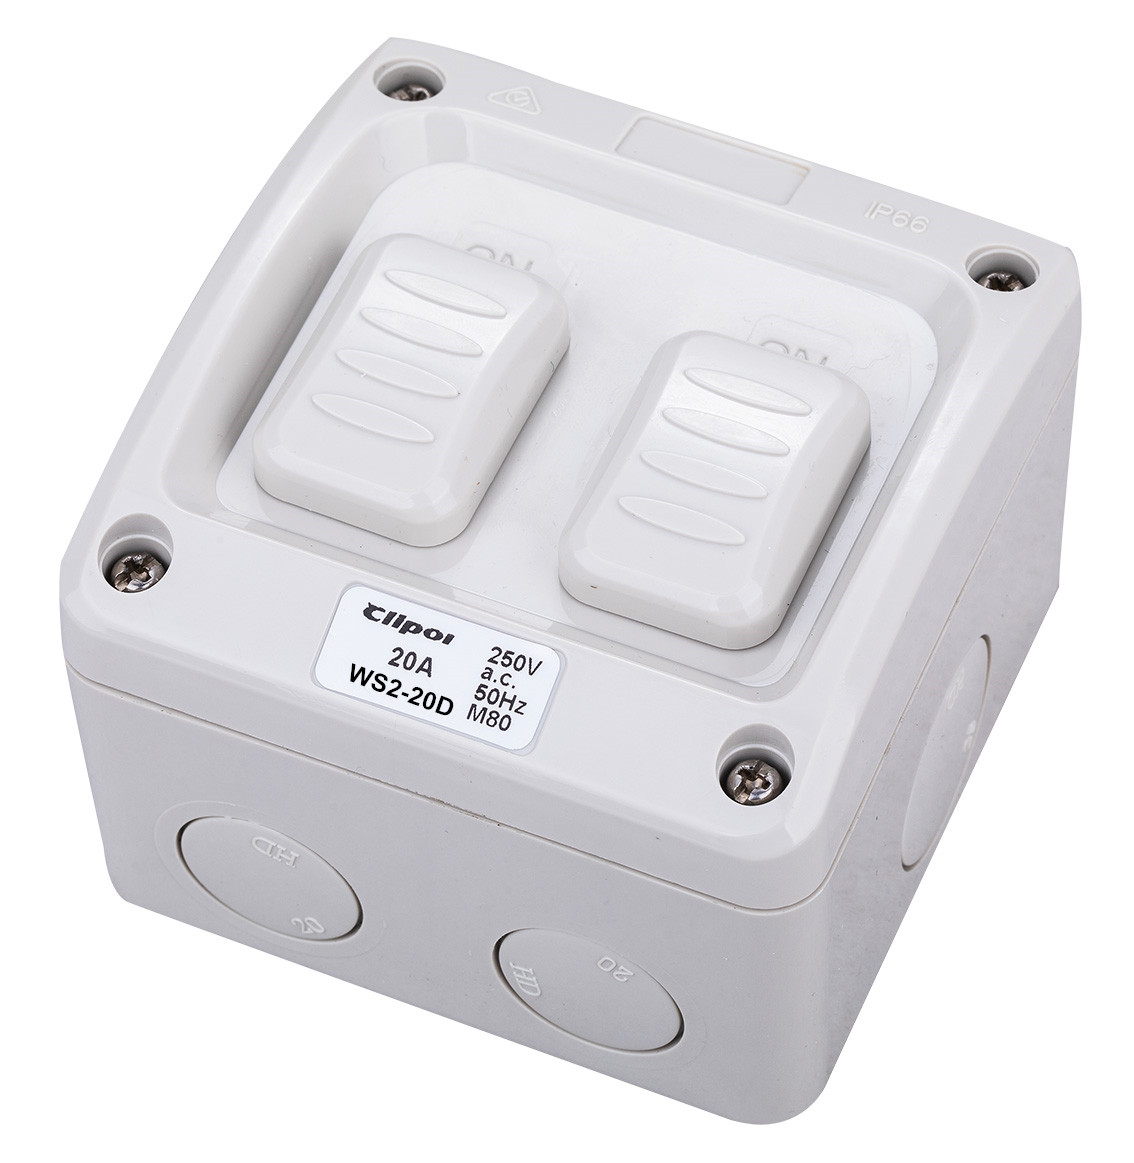 SAA Approved IP66 Weatherproof Double pole double switch  20A 250V WS-20D Featured Image